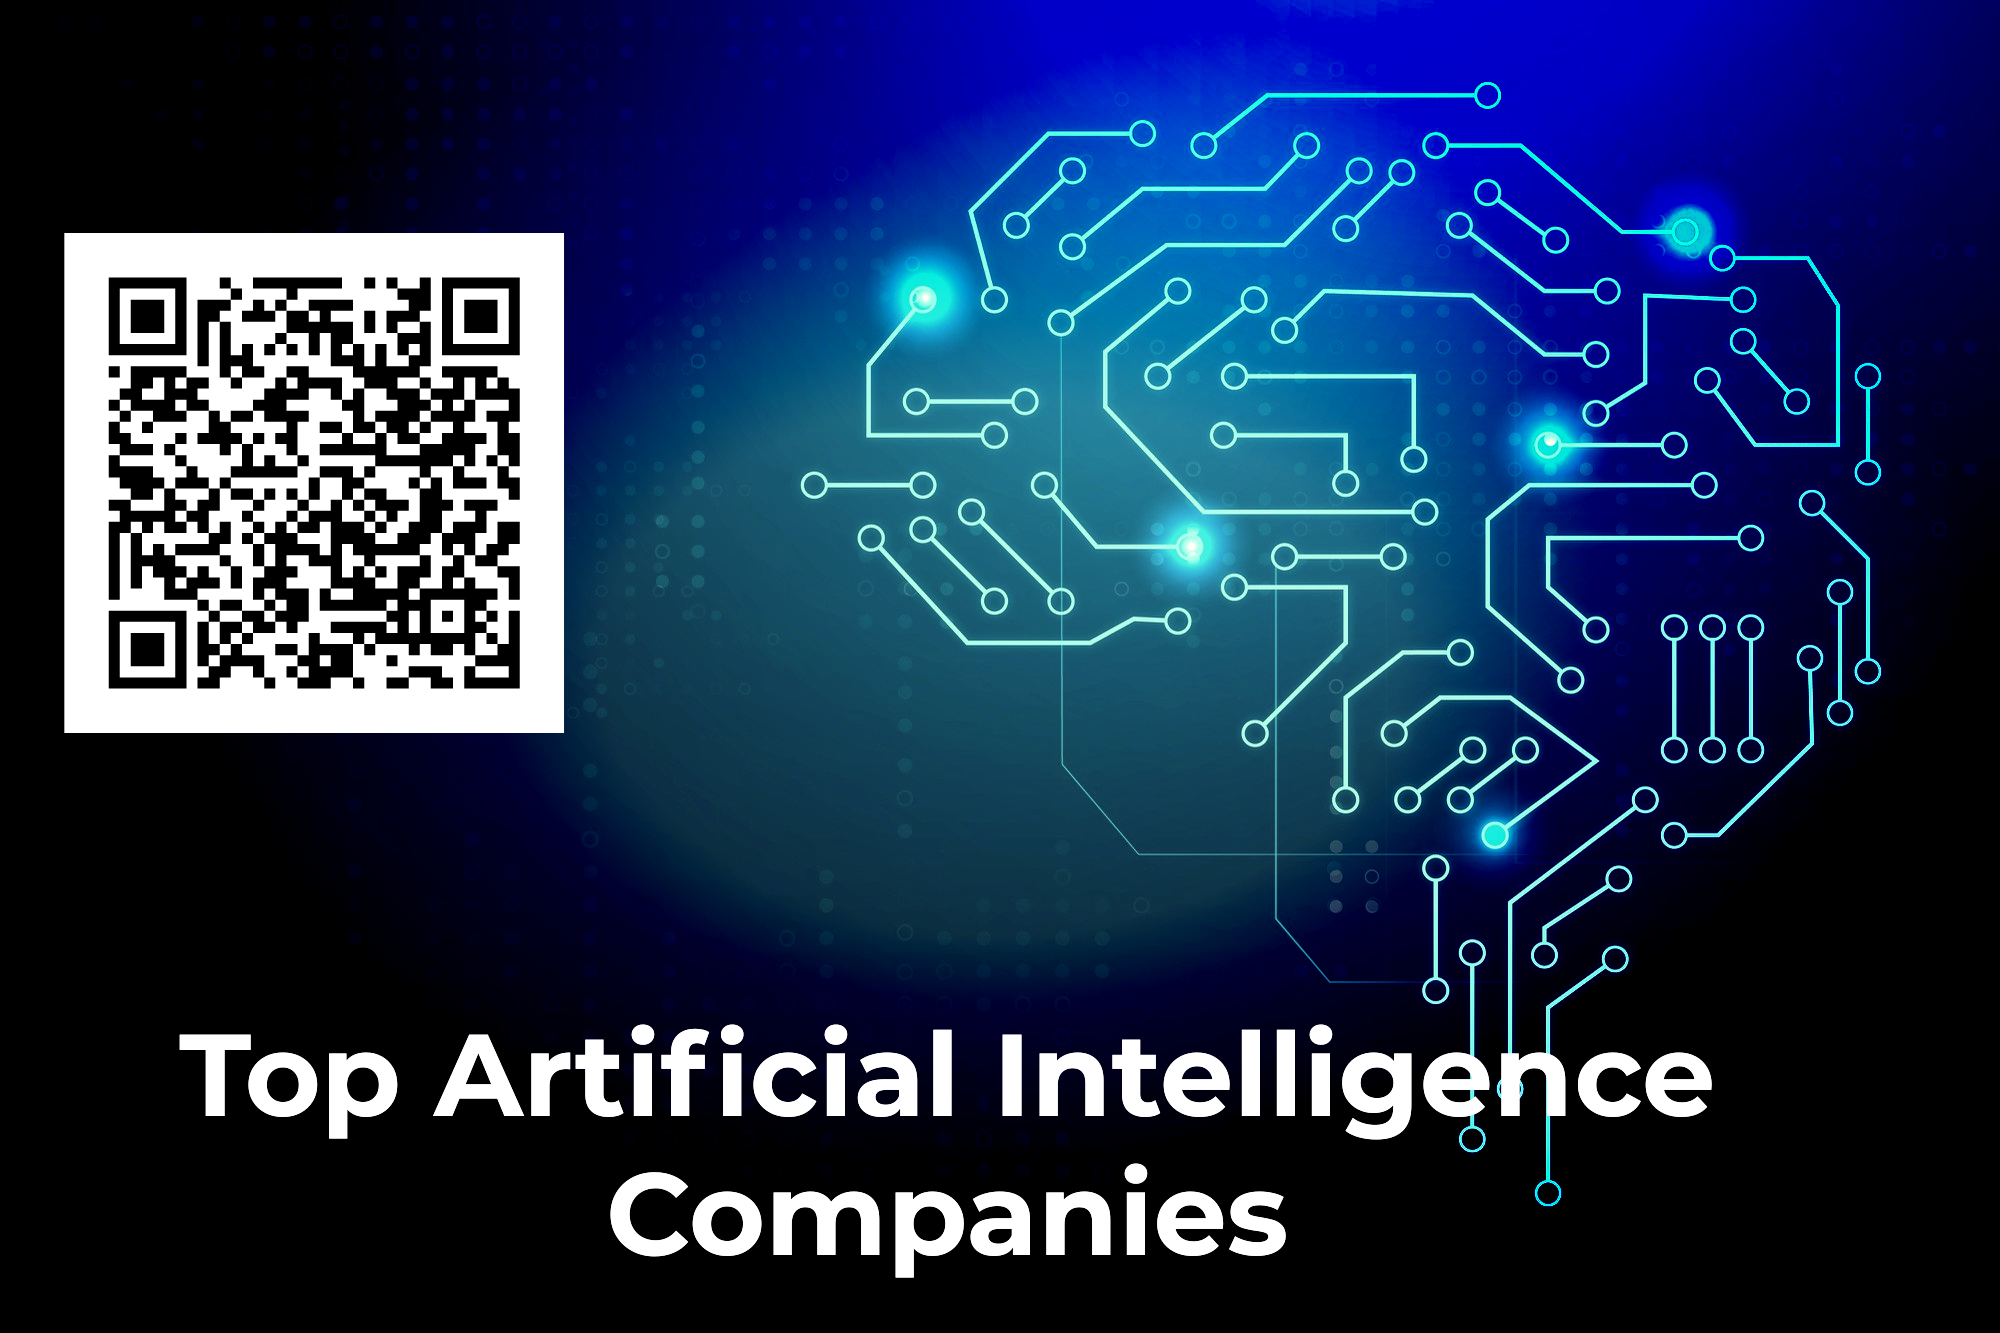 Top Artificial Intelligence Companies 2022